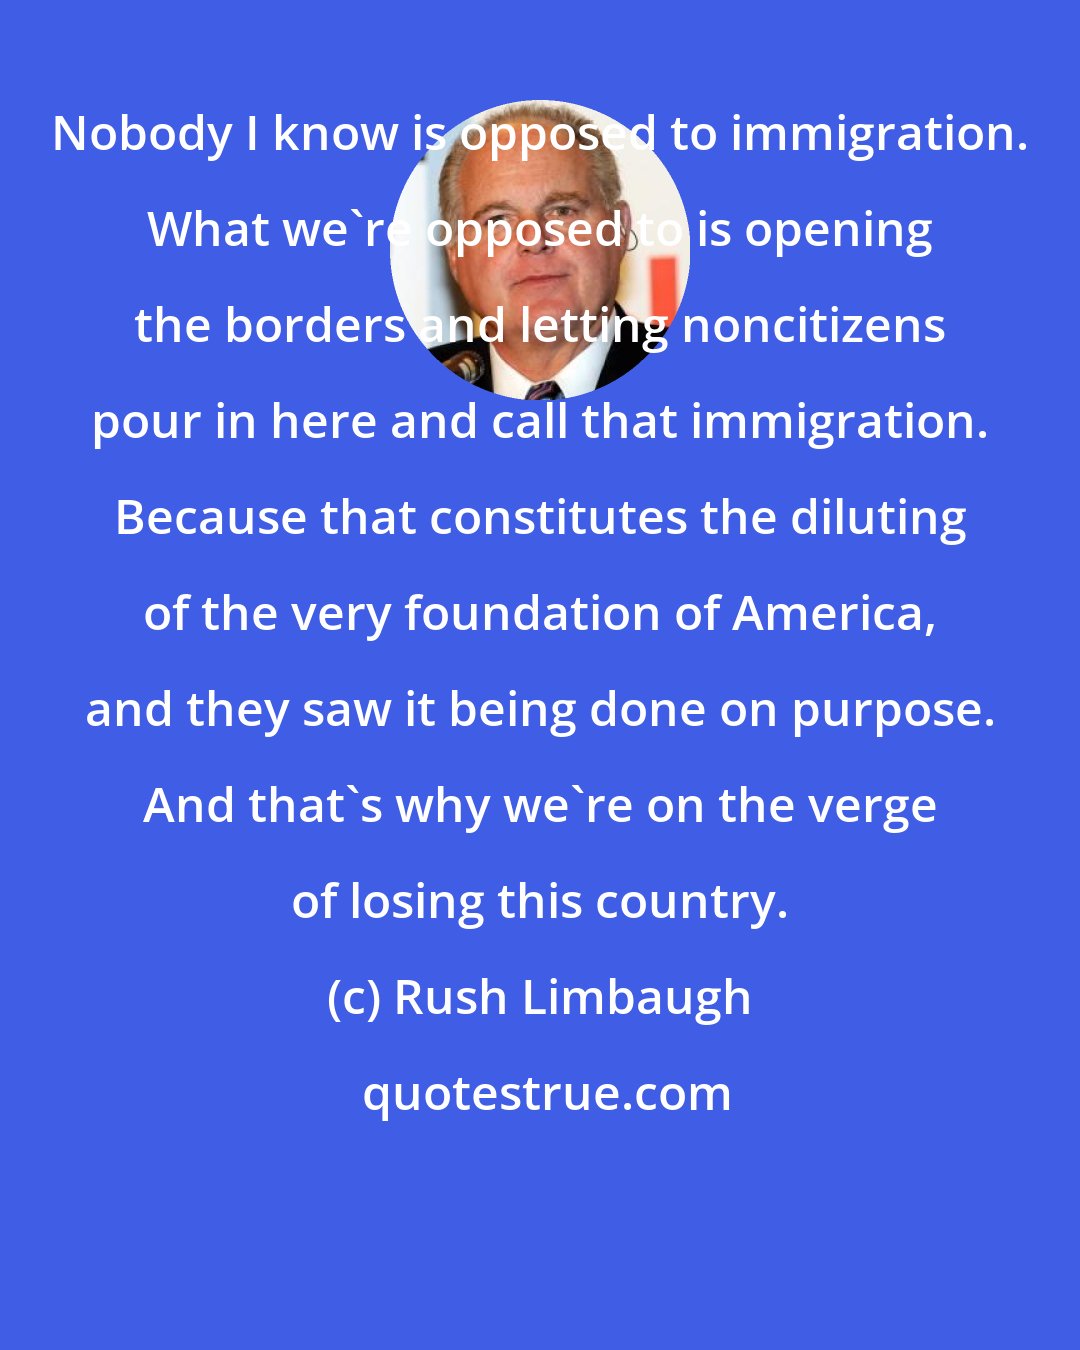 Rush Limbaugh: Nobody I know is opposed to immigration. What we're opposed to is opening the borders and letting noncitizens pour in here and call that immigration. Because that constitutes the diluting of the very foundation of America, and they saw it being done on purpose. And that's why we're on the verge of losing this country.